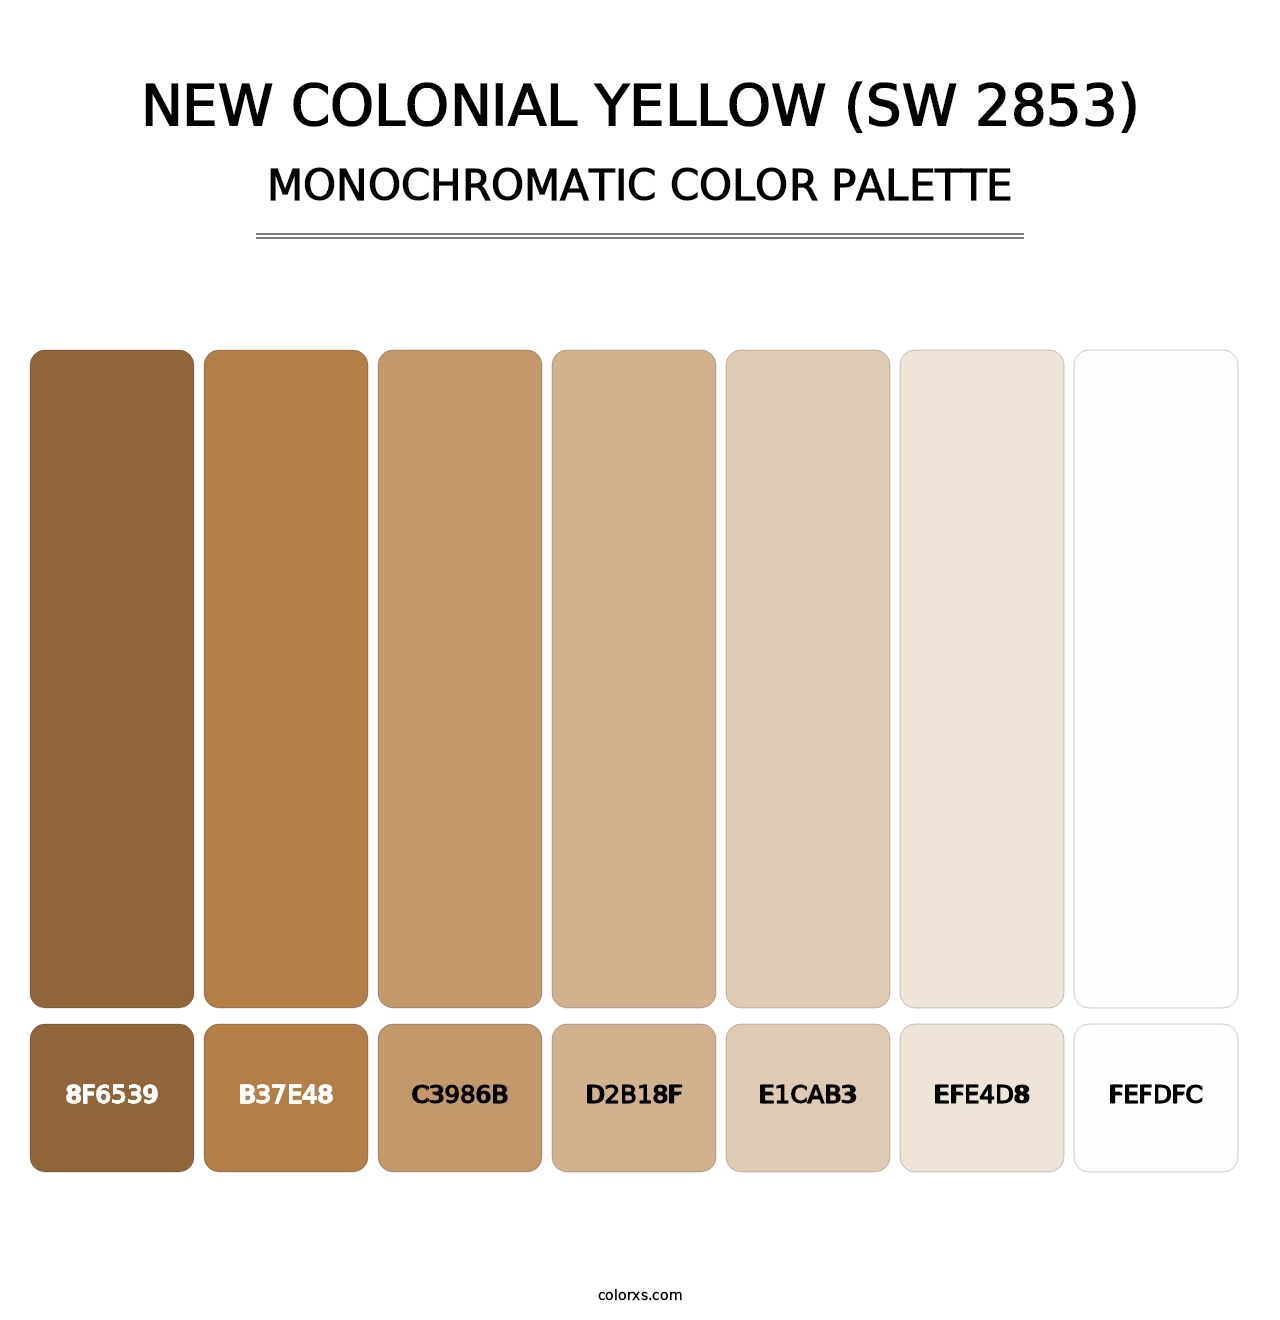 New Colonial Yellow (SW 2853) - Monochromatic Color Palette